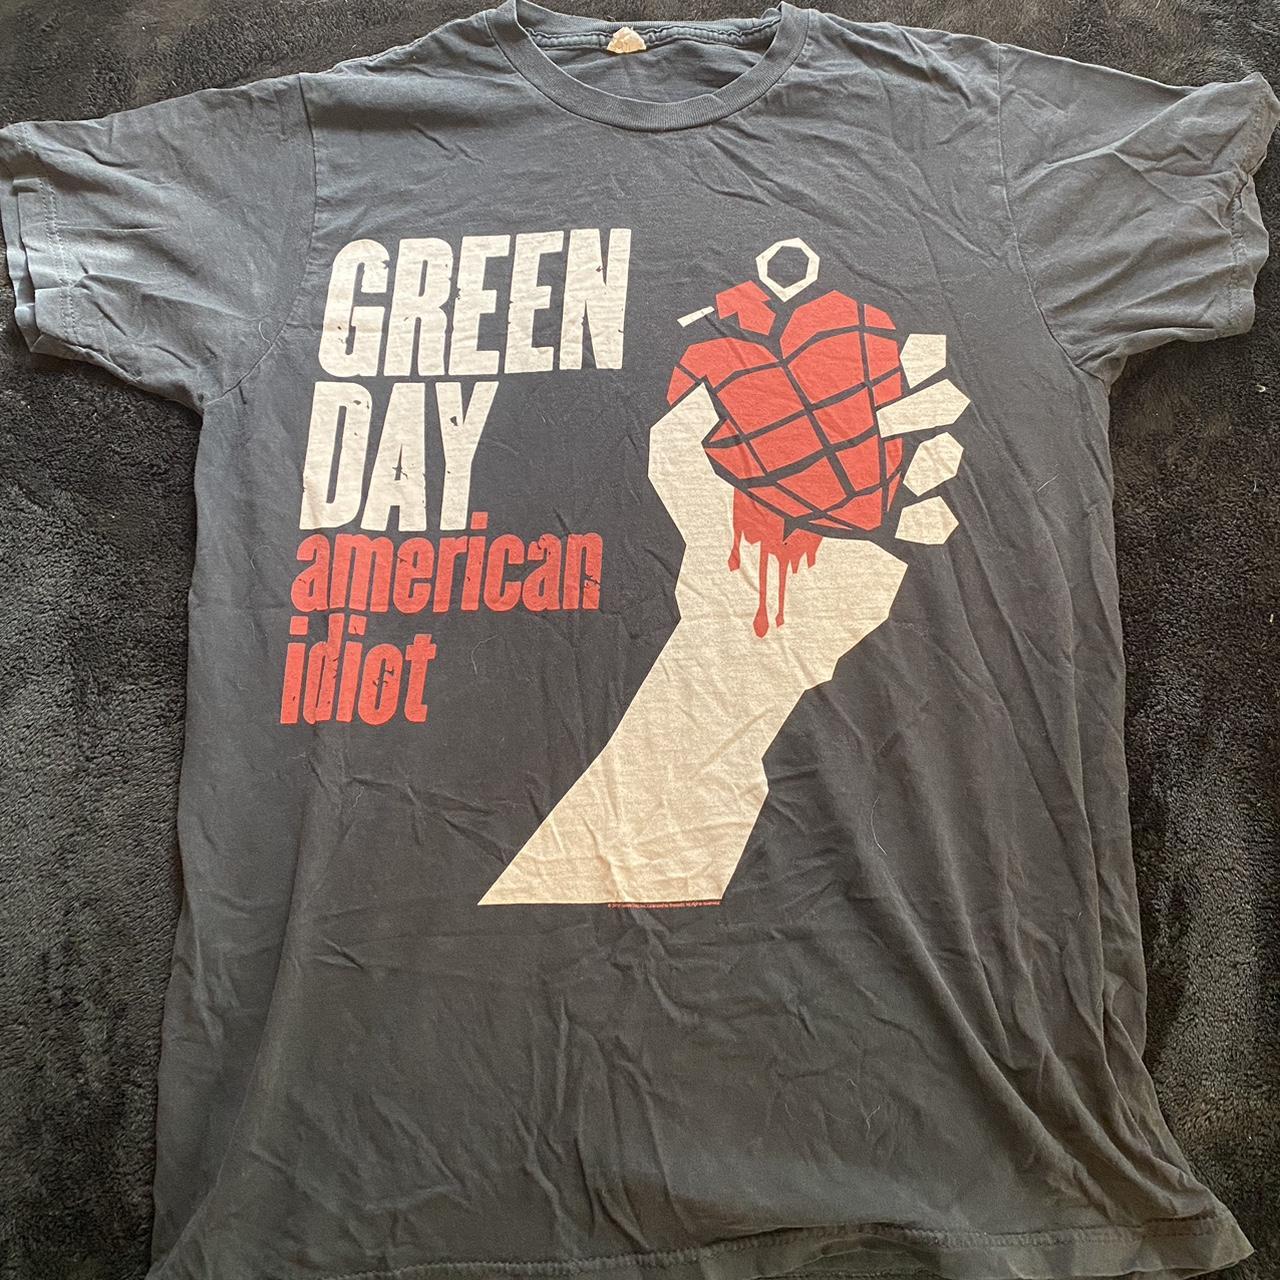 I got a Green Day shirt (and pin) from Hot Topic today : r/greenday